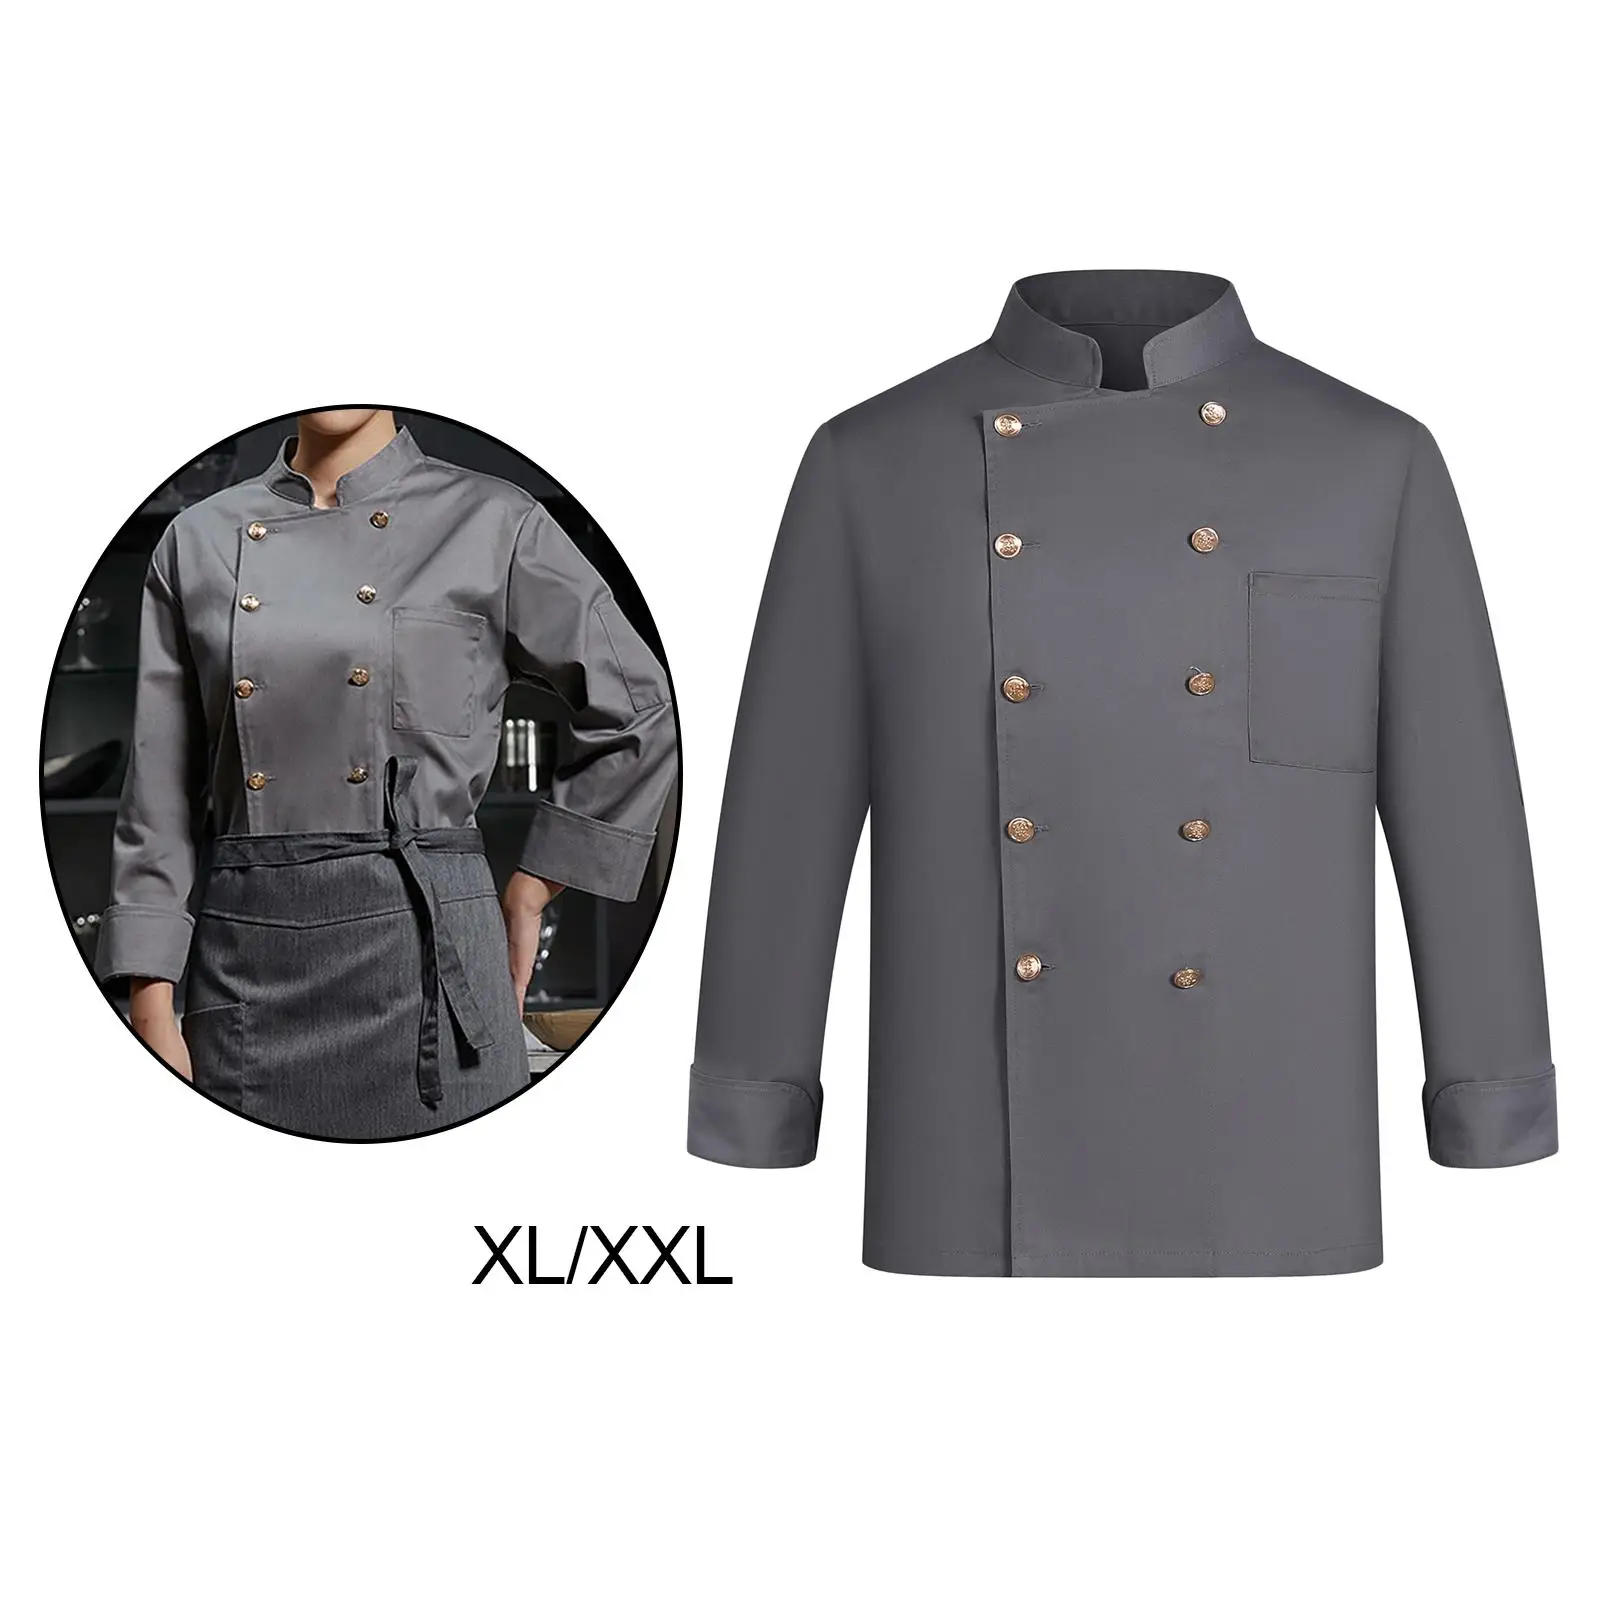 Chef Jacket Folded Cuffs Overalls Clothes Men Wear Resistant Soft Gray Chef Coat for Kitchen Food Industry Buffet Pub